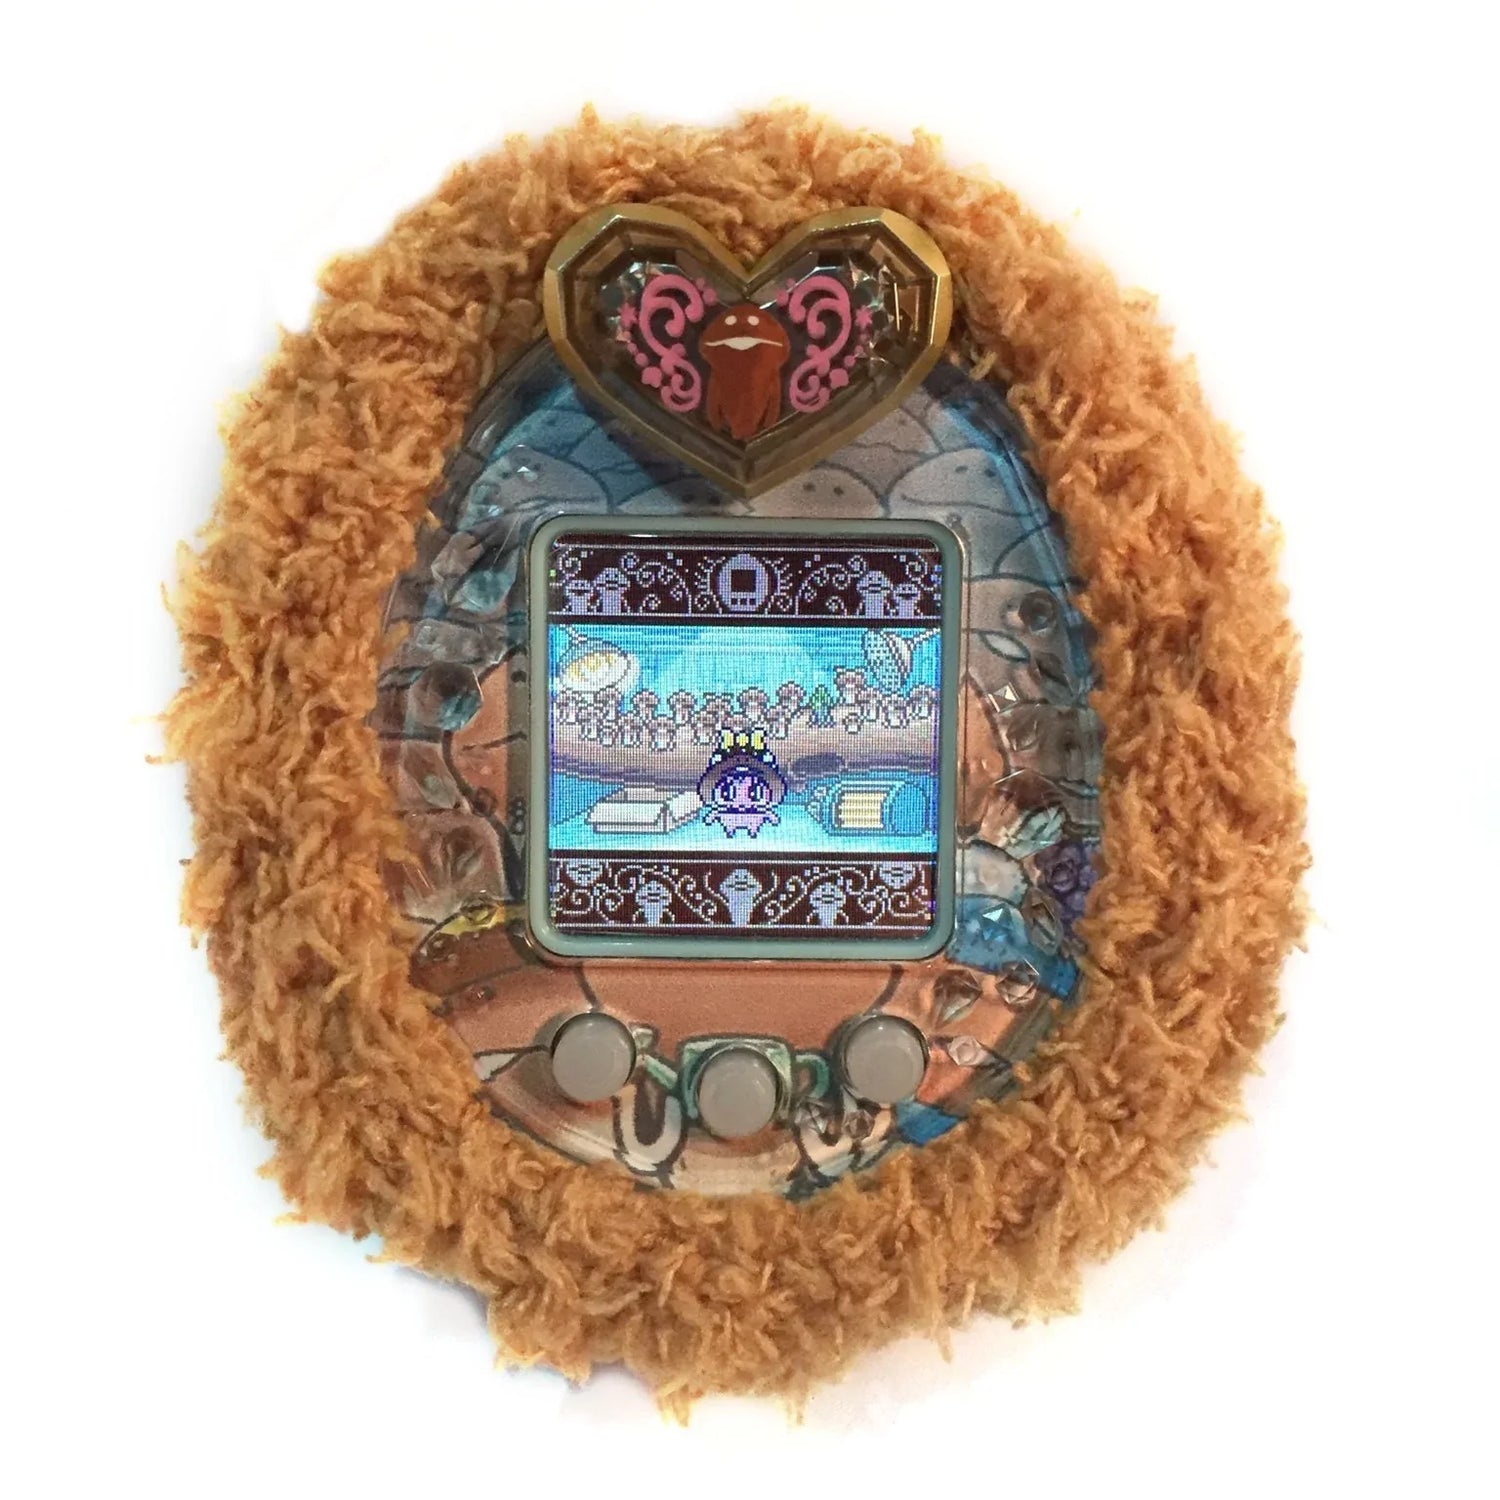 Tamagotchi Fuzzy Cover - Color Tamas & Connections Fuzzy N Chic